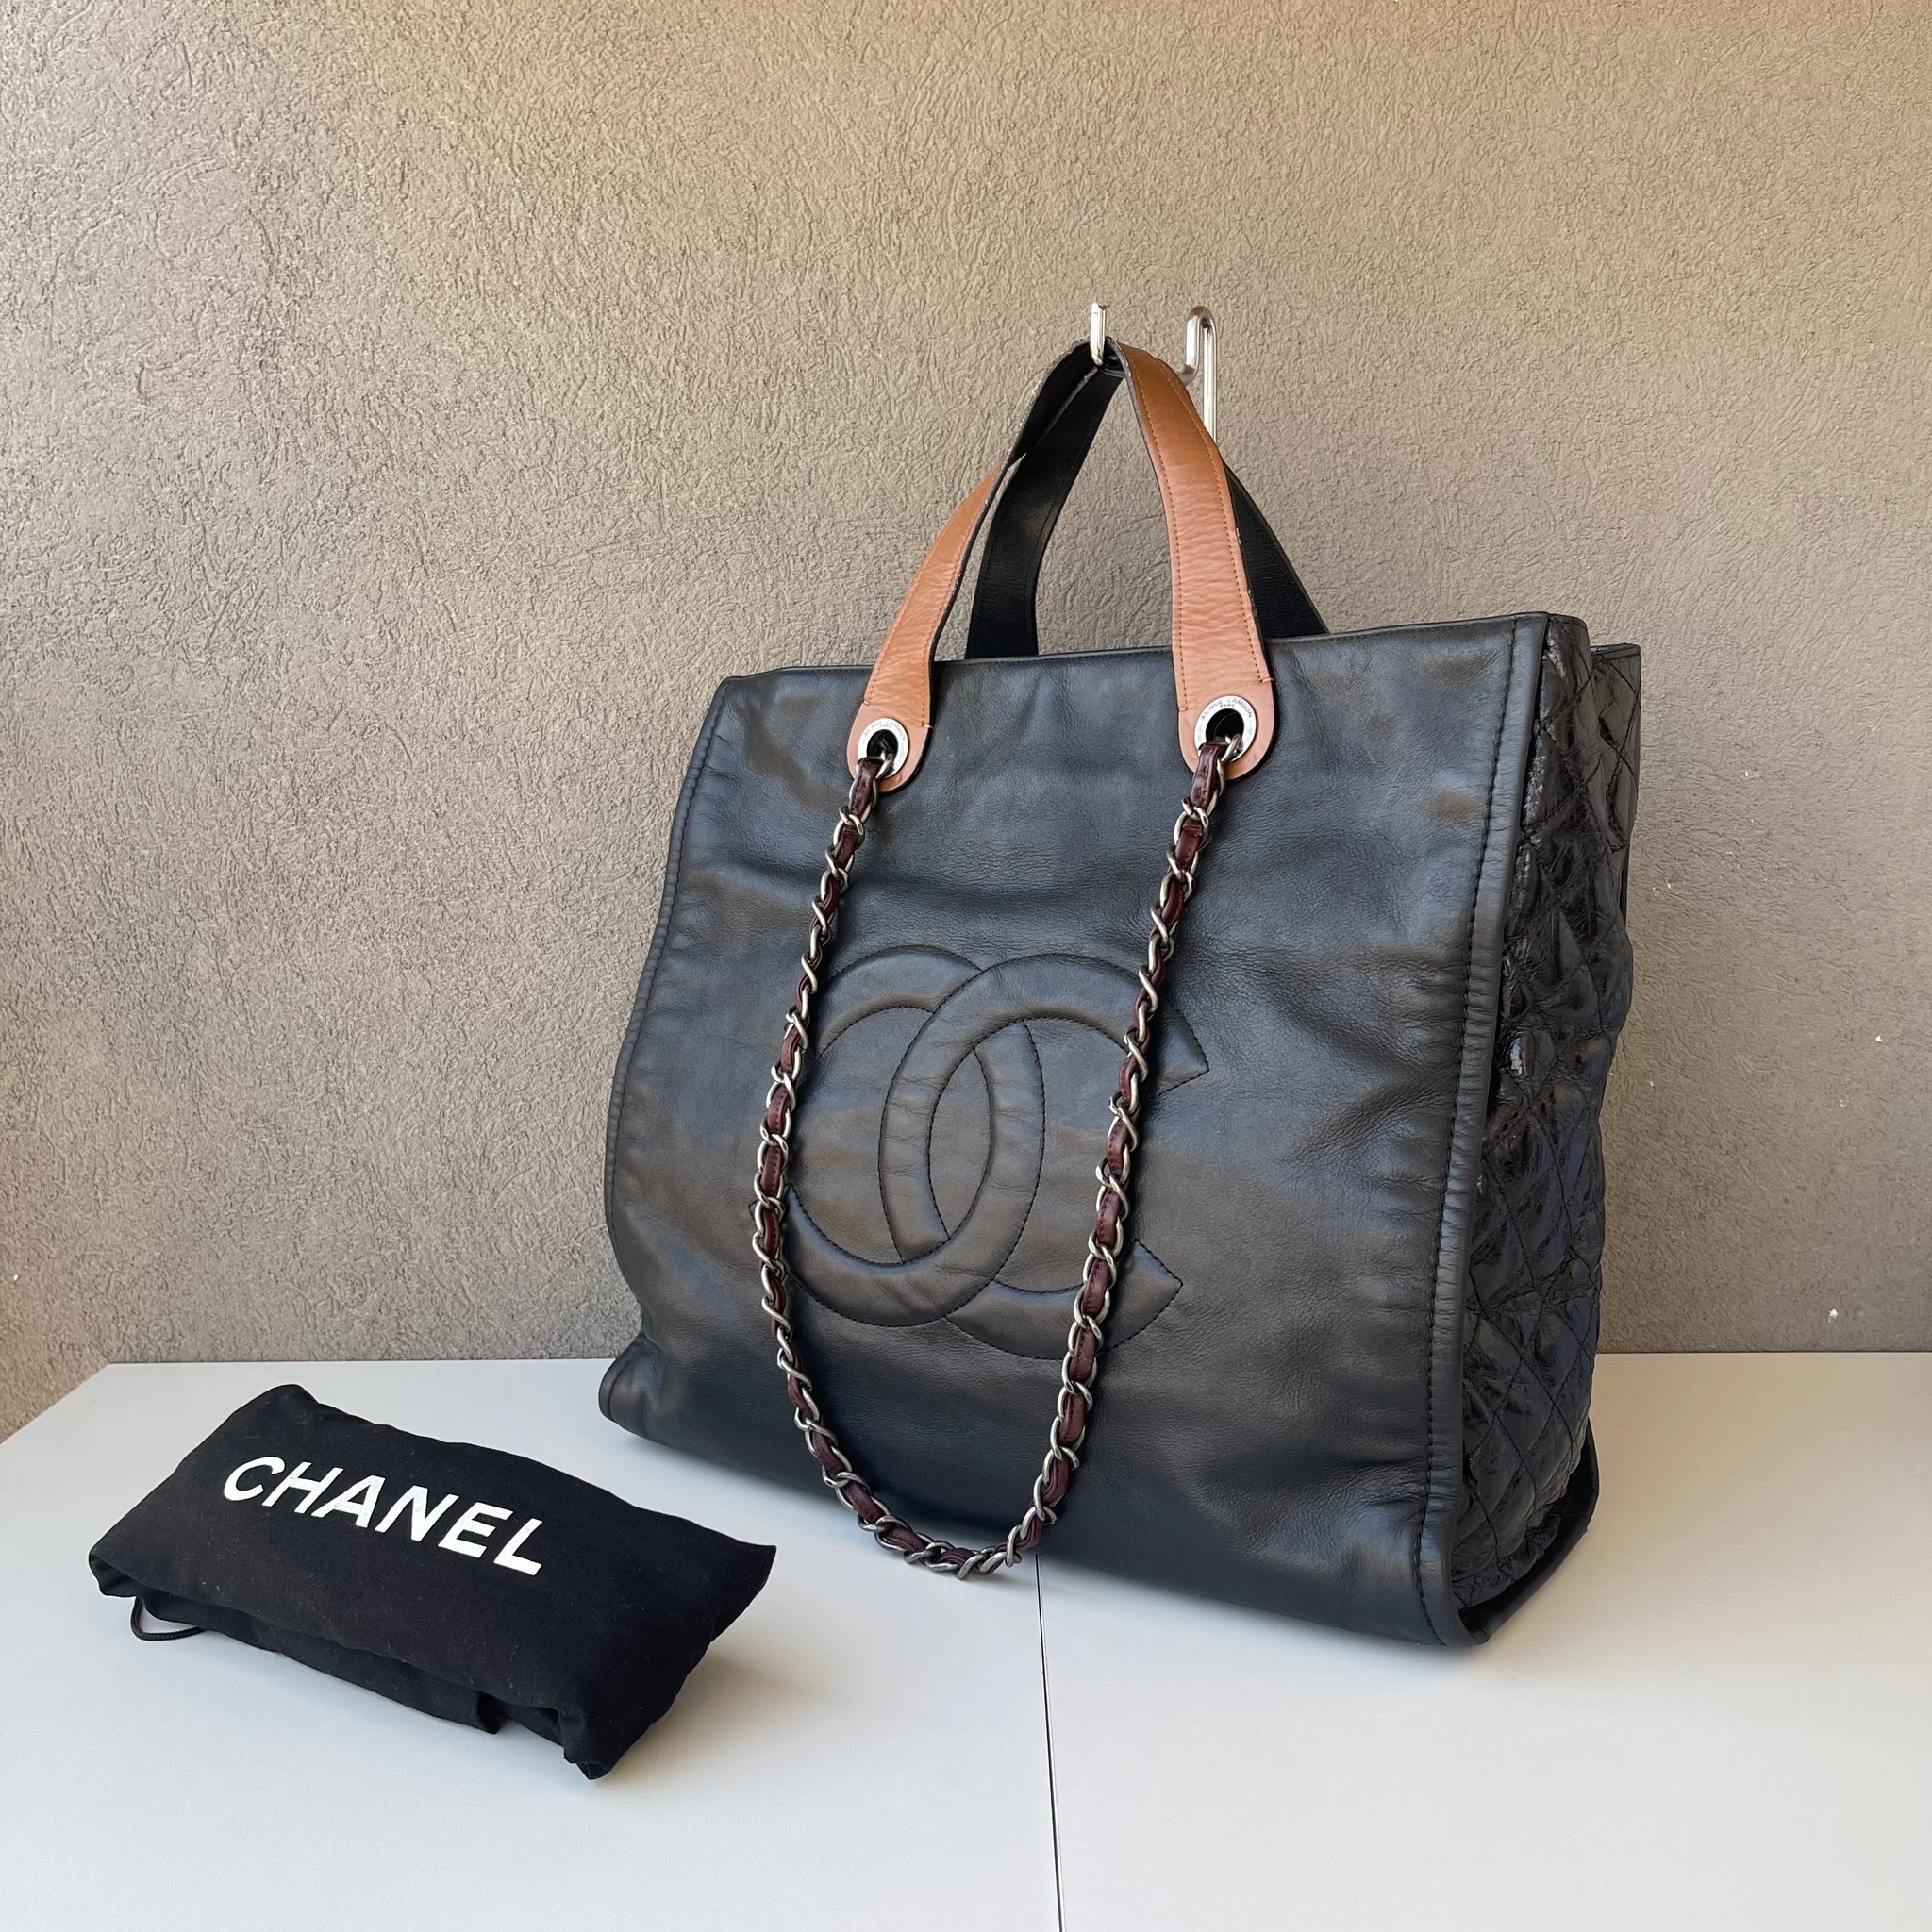 Chanel In The Mix Maxi Tote Bag